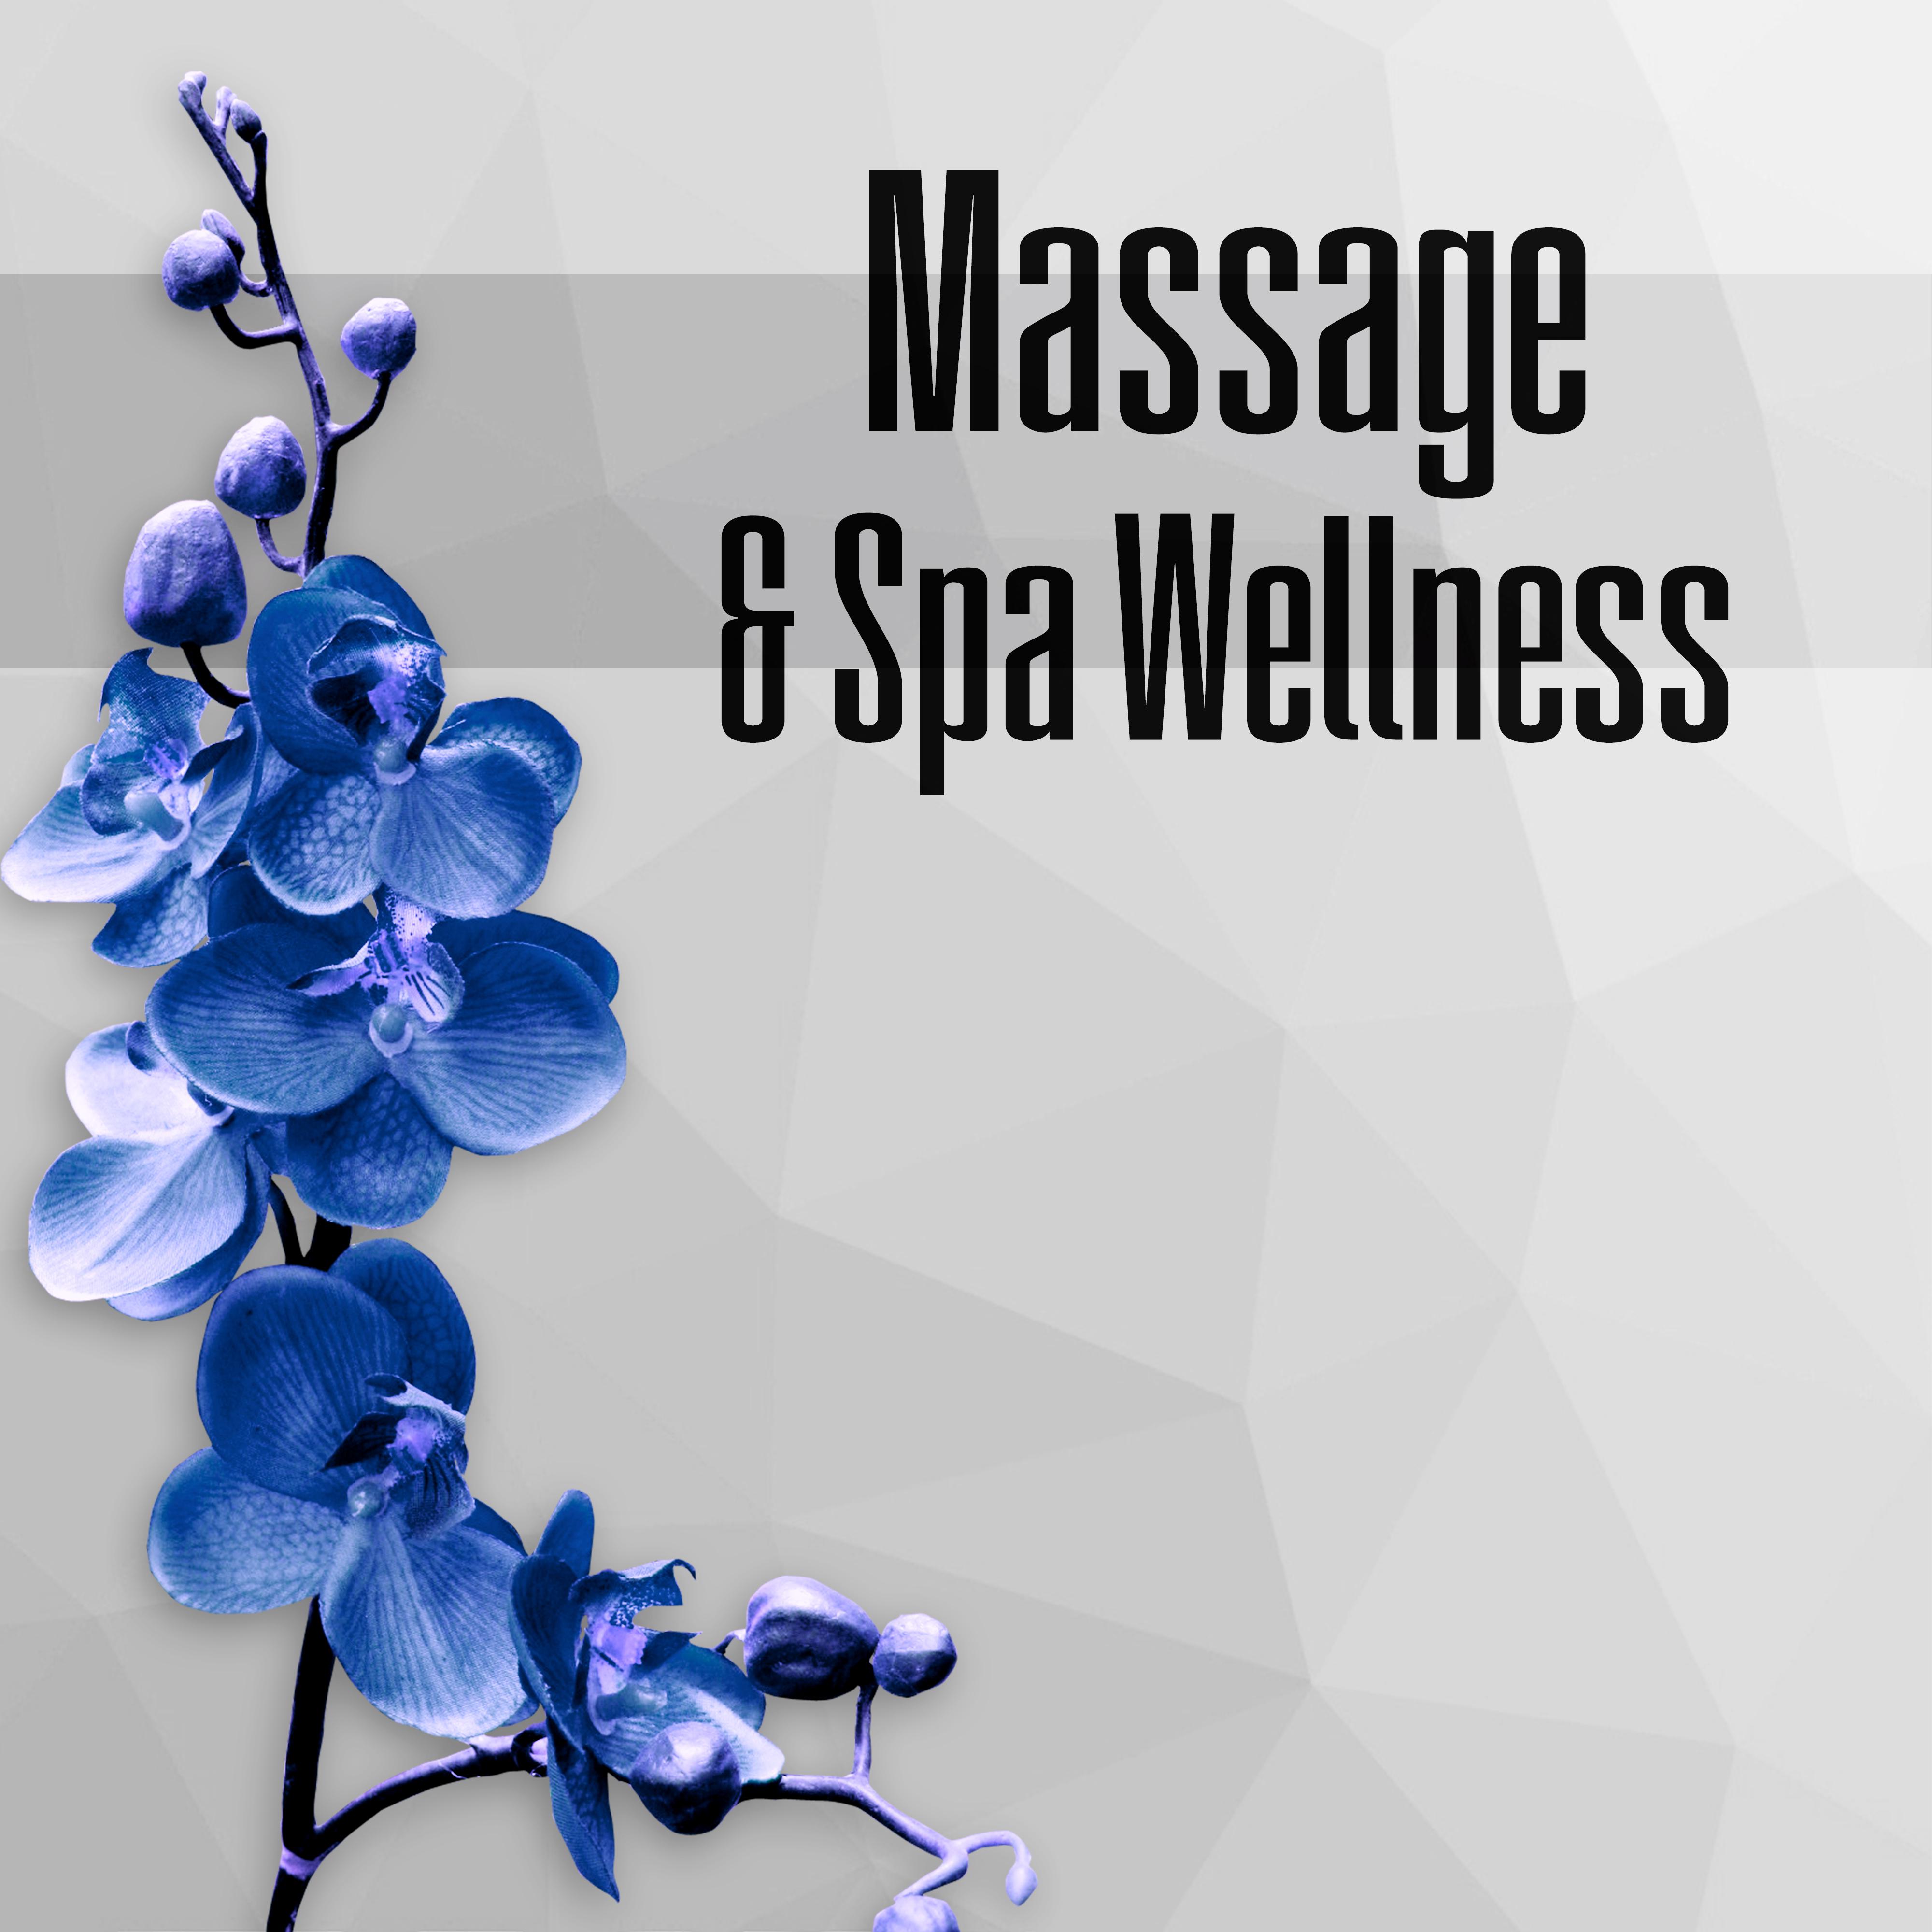 Massage & Spa Wellness - Healing Massage Music, New Age for Healing Through Sound and Touch, Pacific Ocean Waves for Well Being and Healthy Lifestyle, Water & Rain Sounds, Serenity Spa